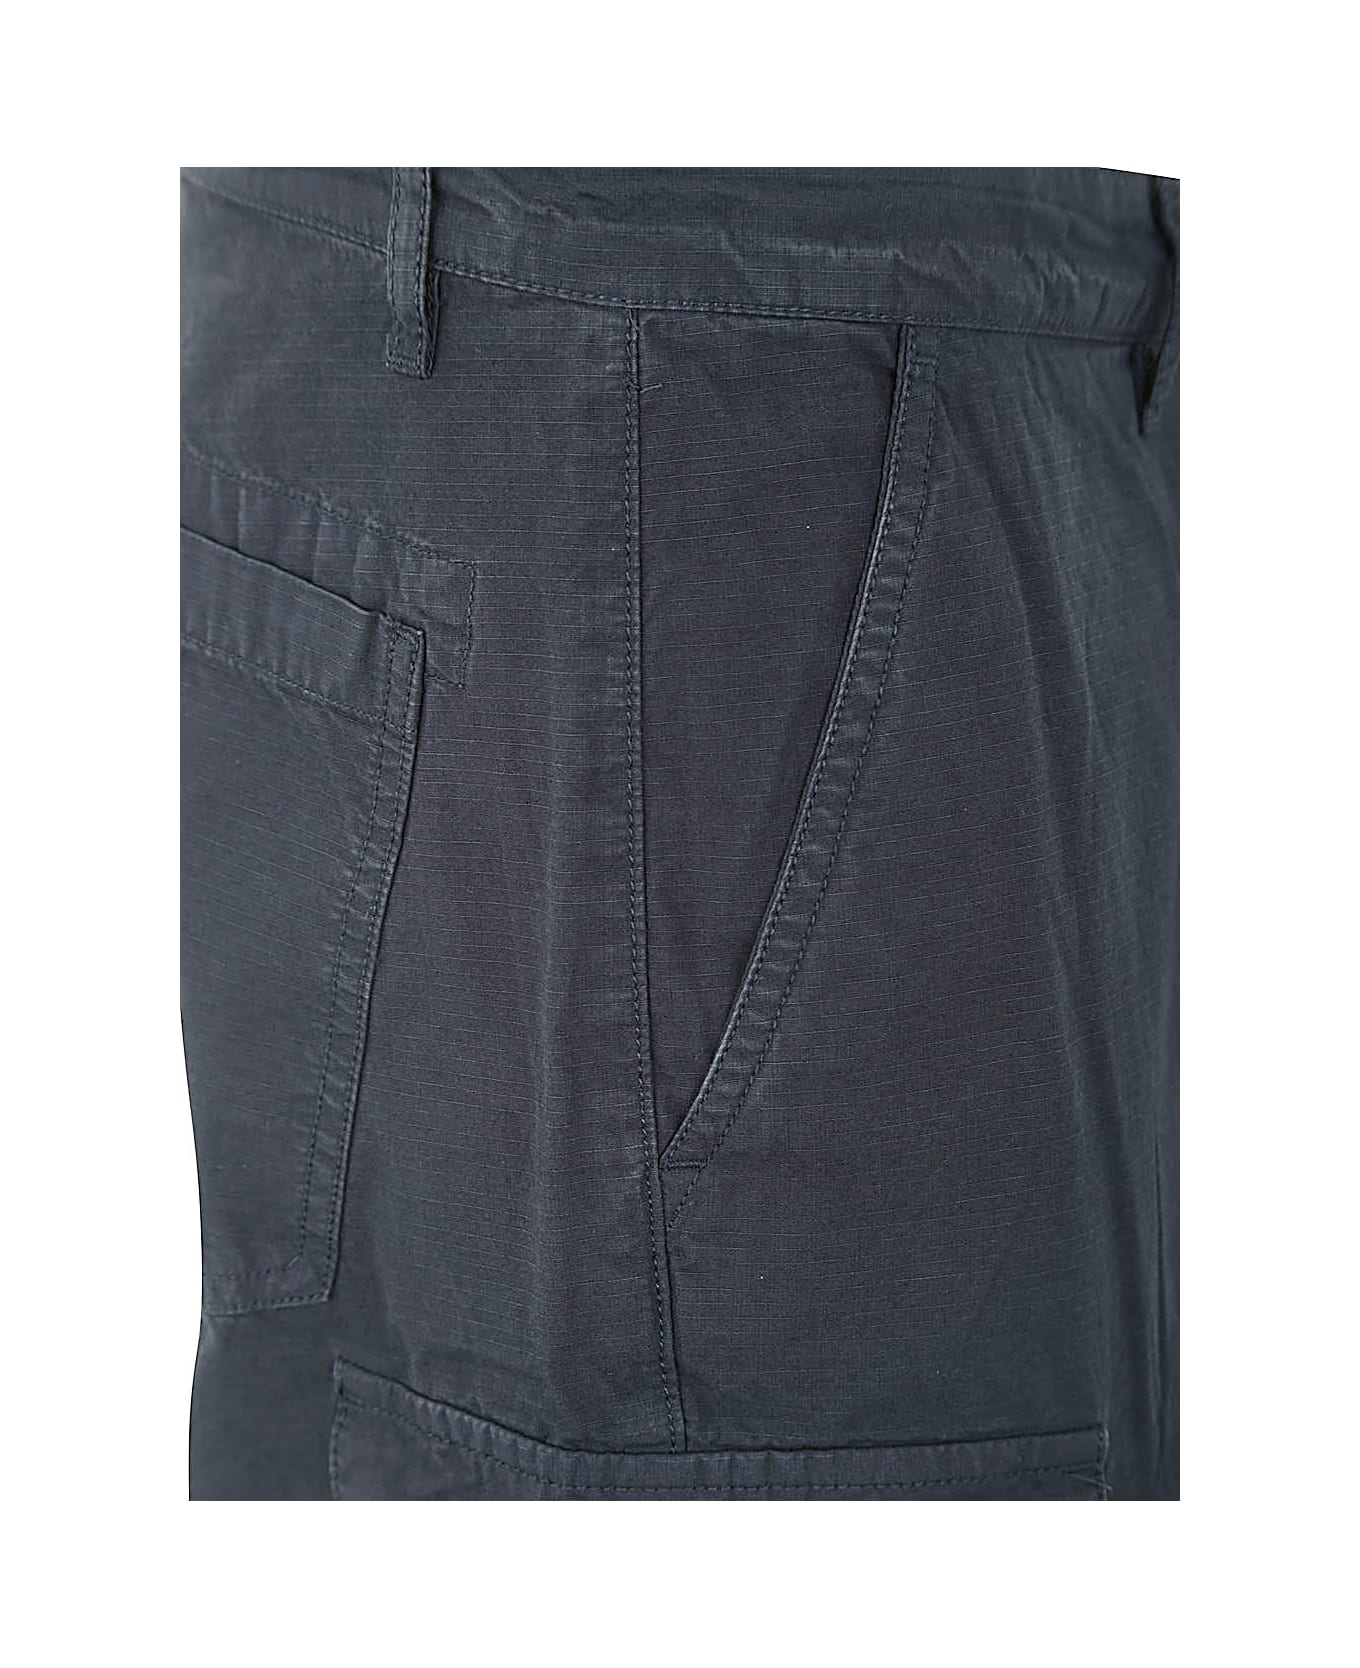 Barbour Essential Ripstop Cargo Trousers - Navy